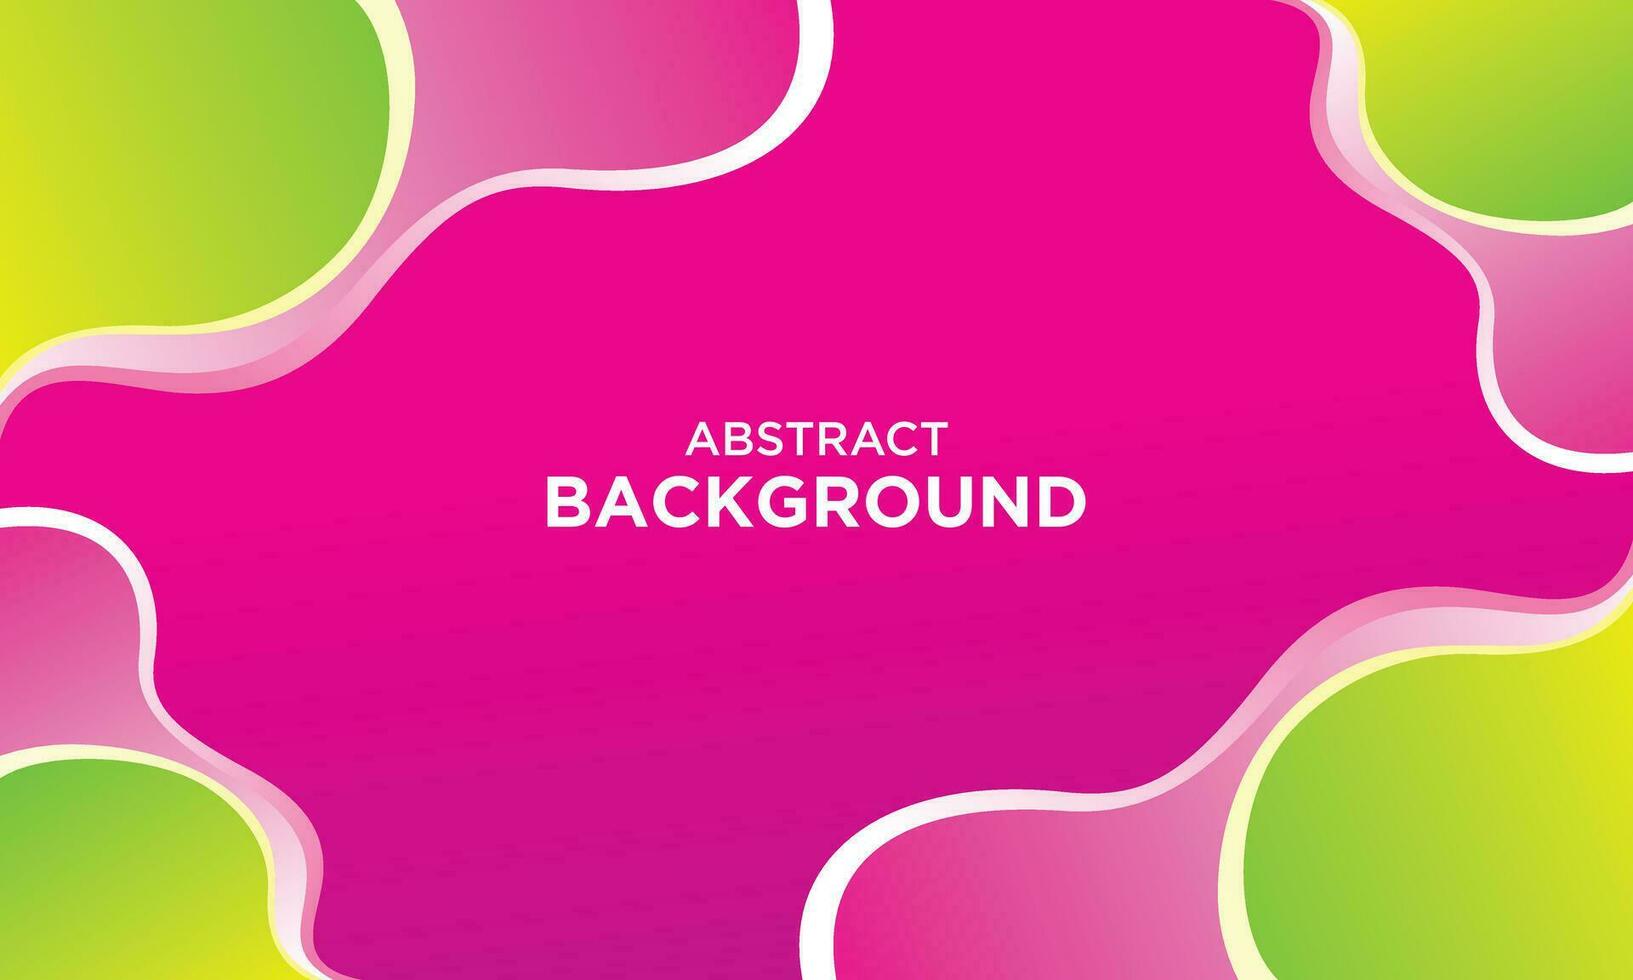 Abstract background vector with pink and green color design concept